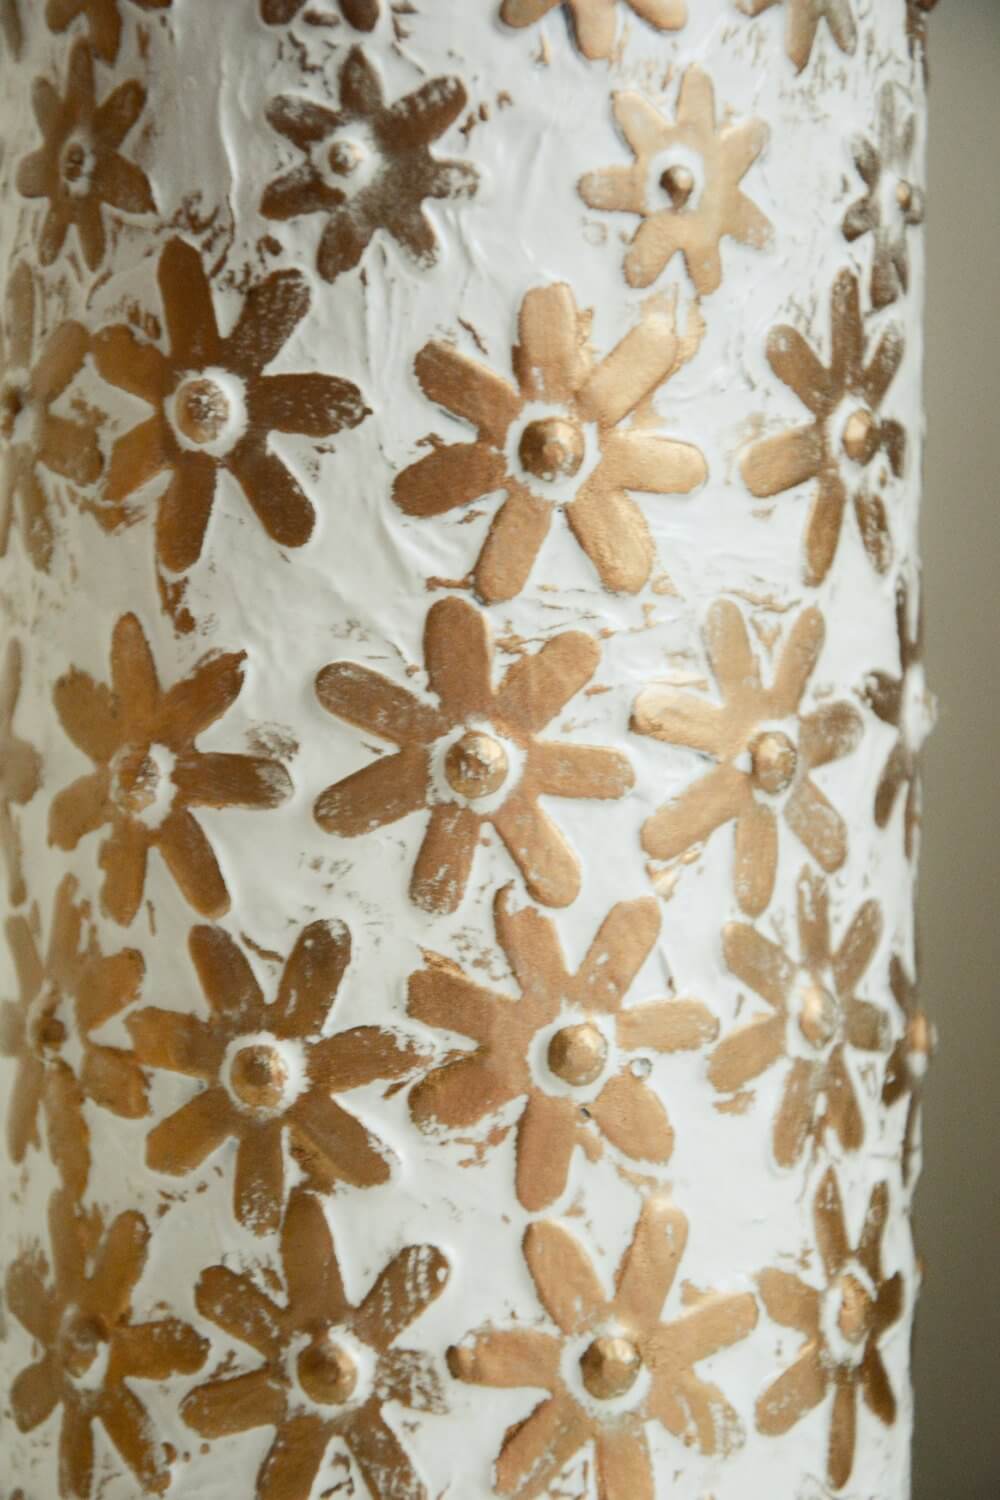 Floral Table Lamp, up-cycled bottle lamp, RishStudio